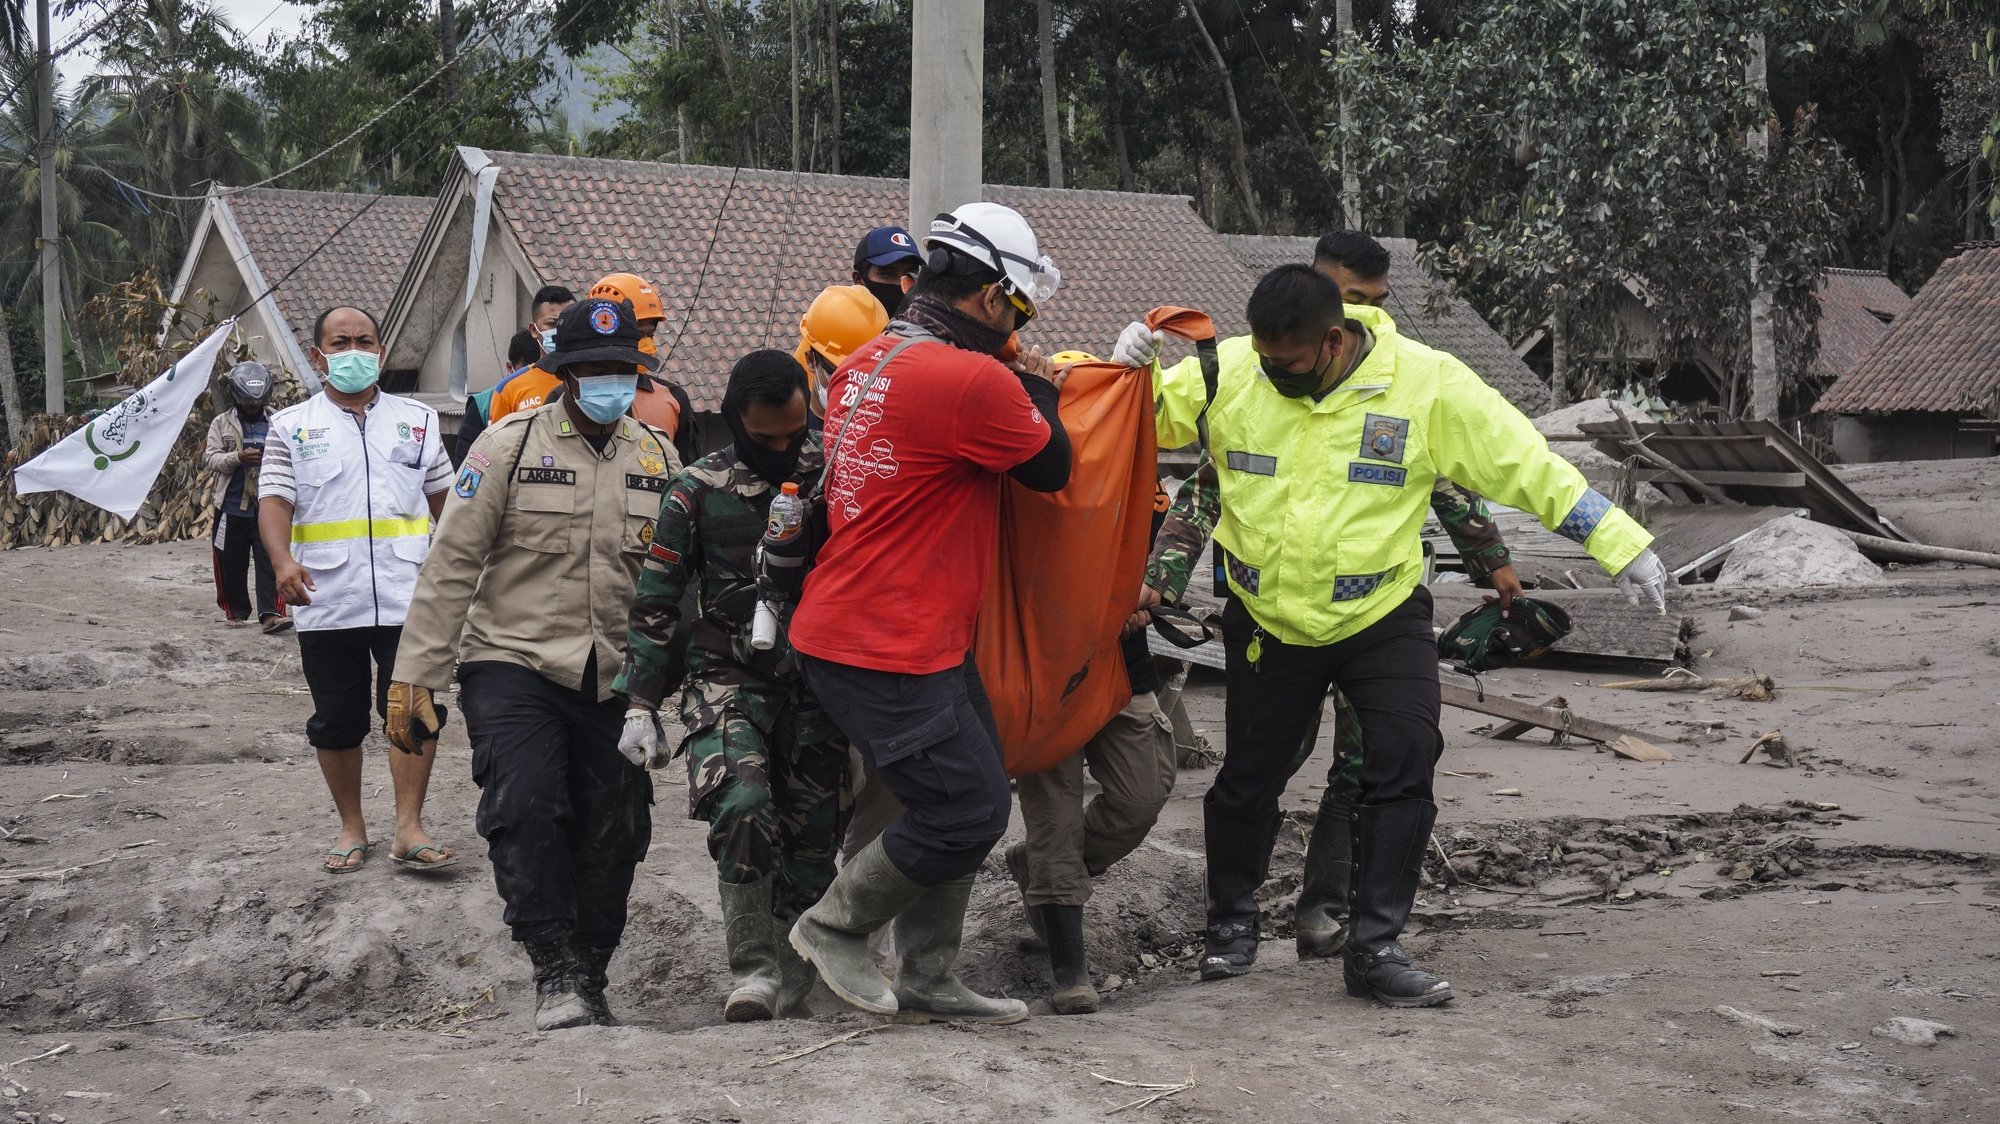 epa09625052 Rescuers carry the body of a victim at an area affected by the eruption of Mount Semeru in Lumajang, East Java, Indonesia, 06 December 2021. The volcano erupted on 04 December, killing at least 14 people and leaving dozens of others injured.  EPA/AMMAR